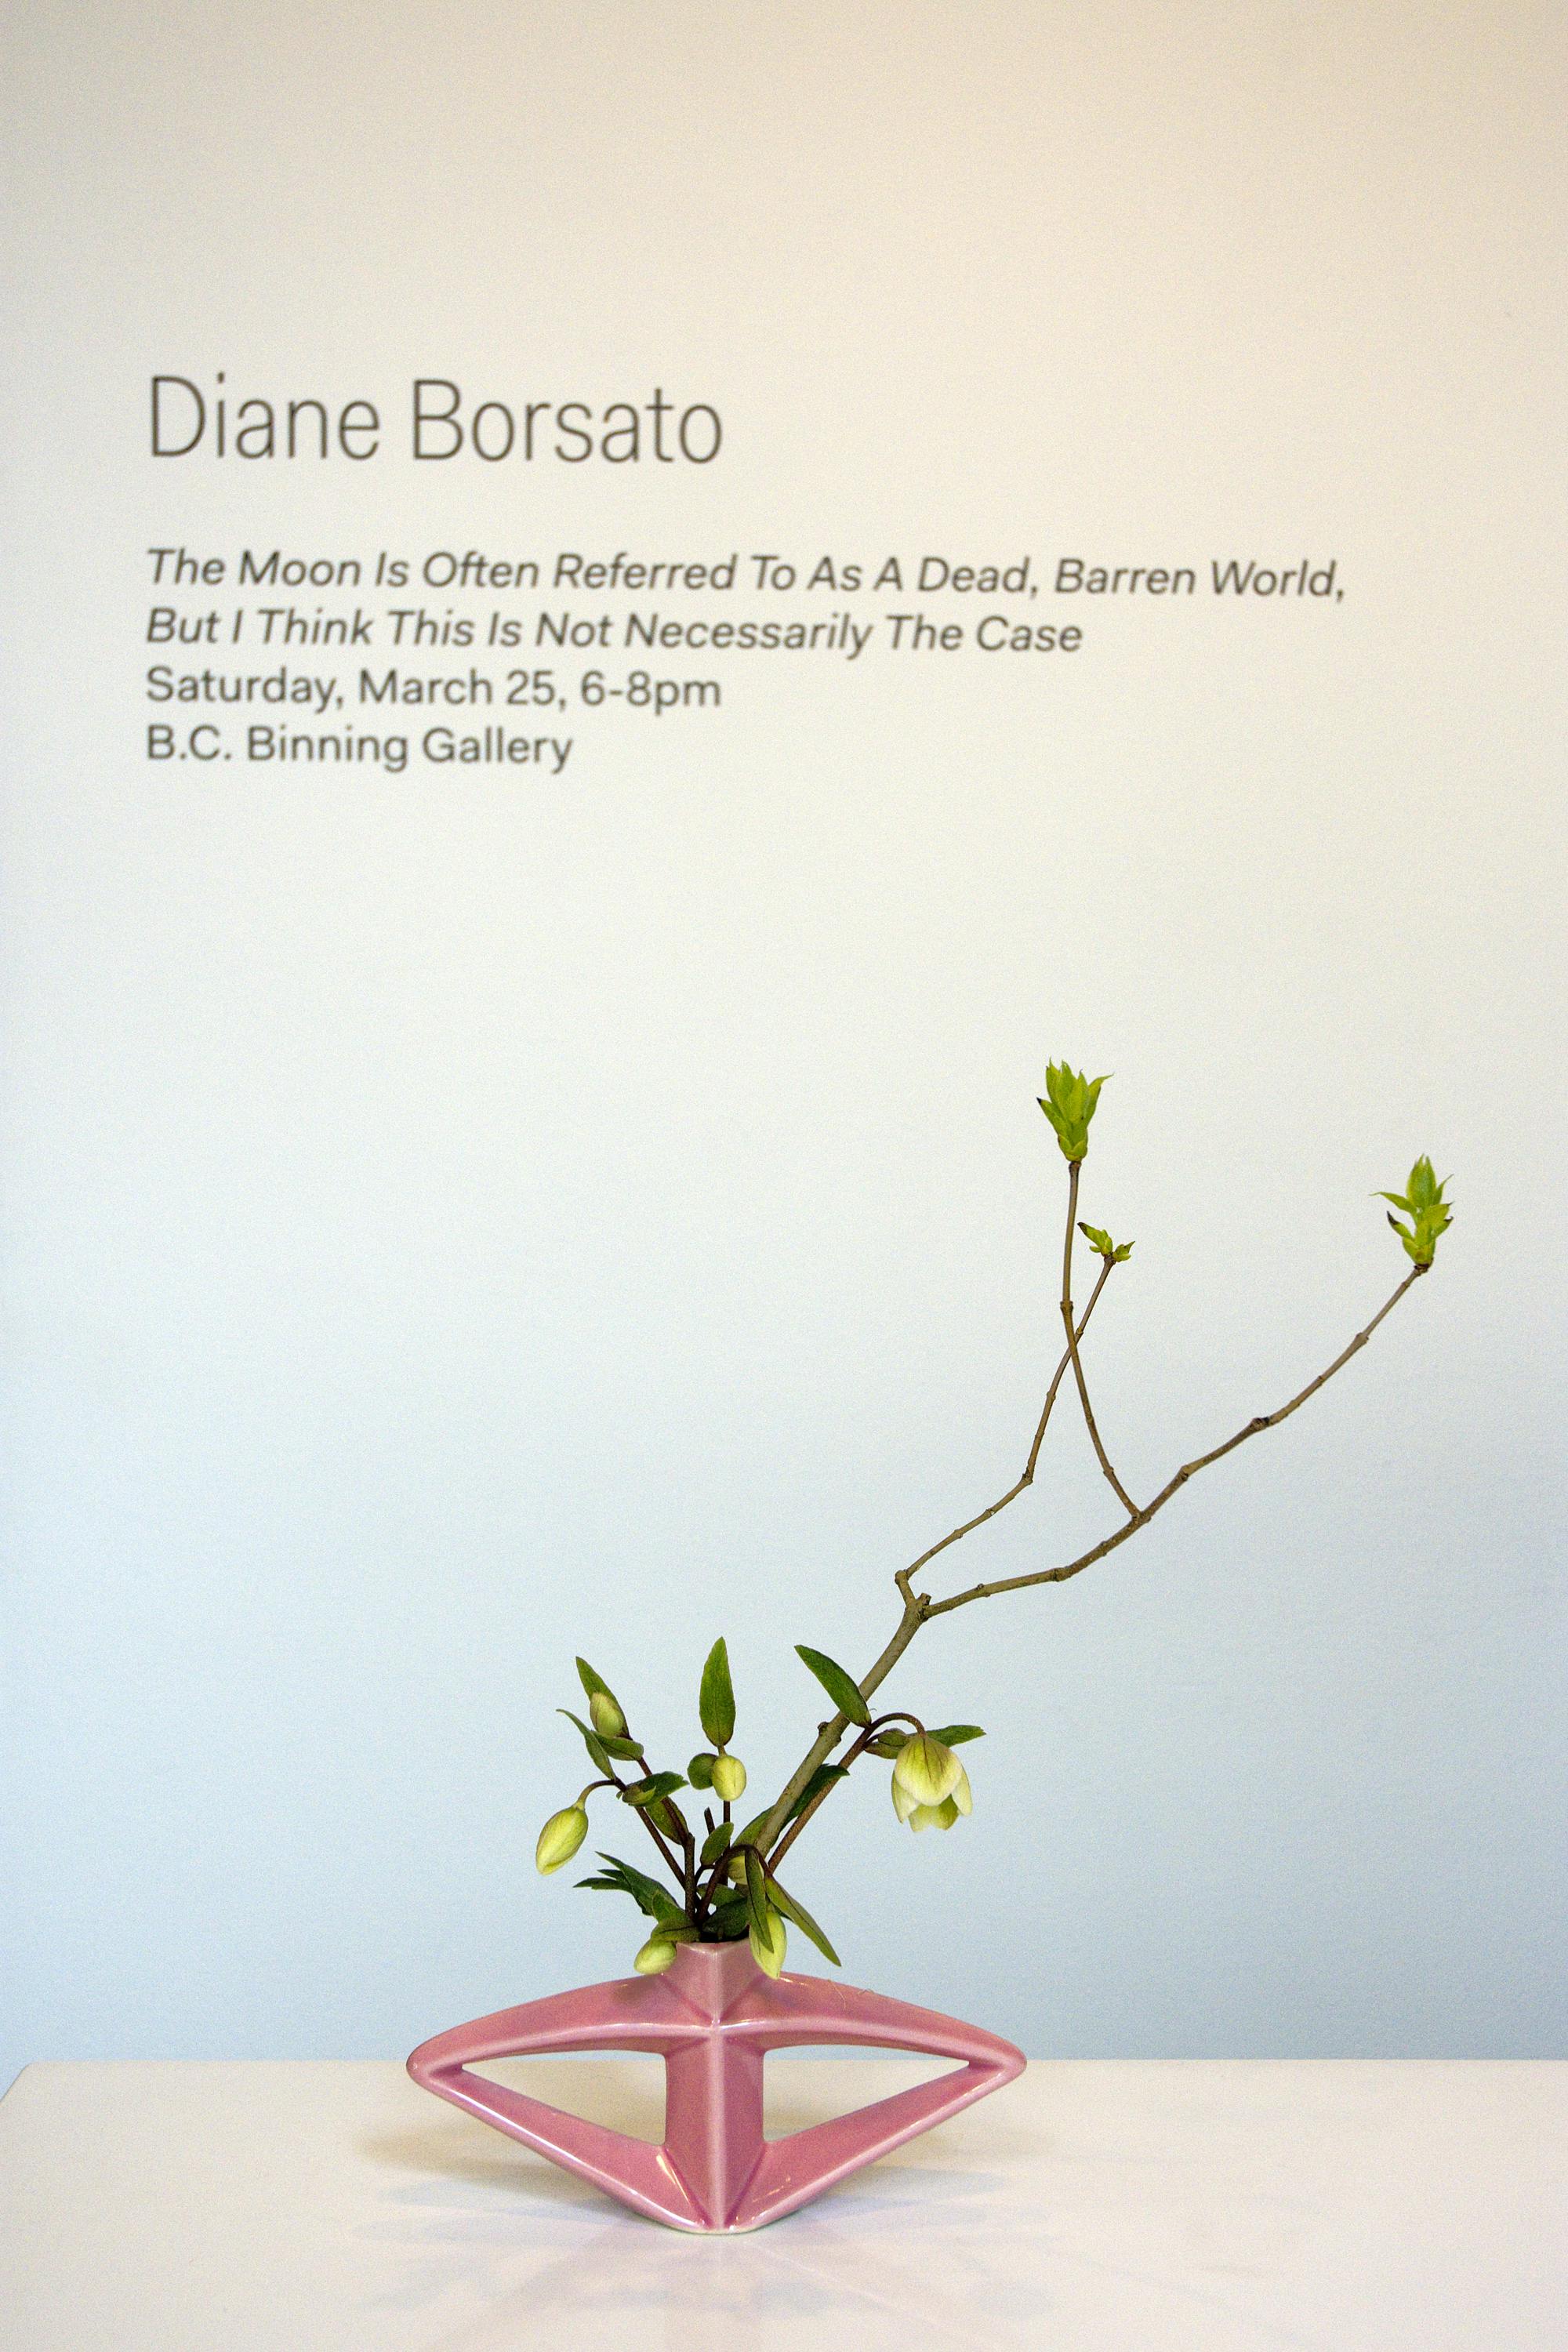 Artist name, exhibition title, date, and location are printed on a wall above a white table. On the table, A triangular-shaped pink vase sits, in which some green flowers and twigs are arranged.